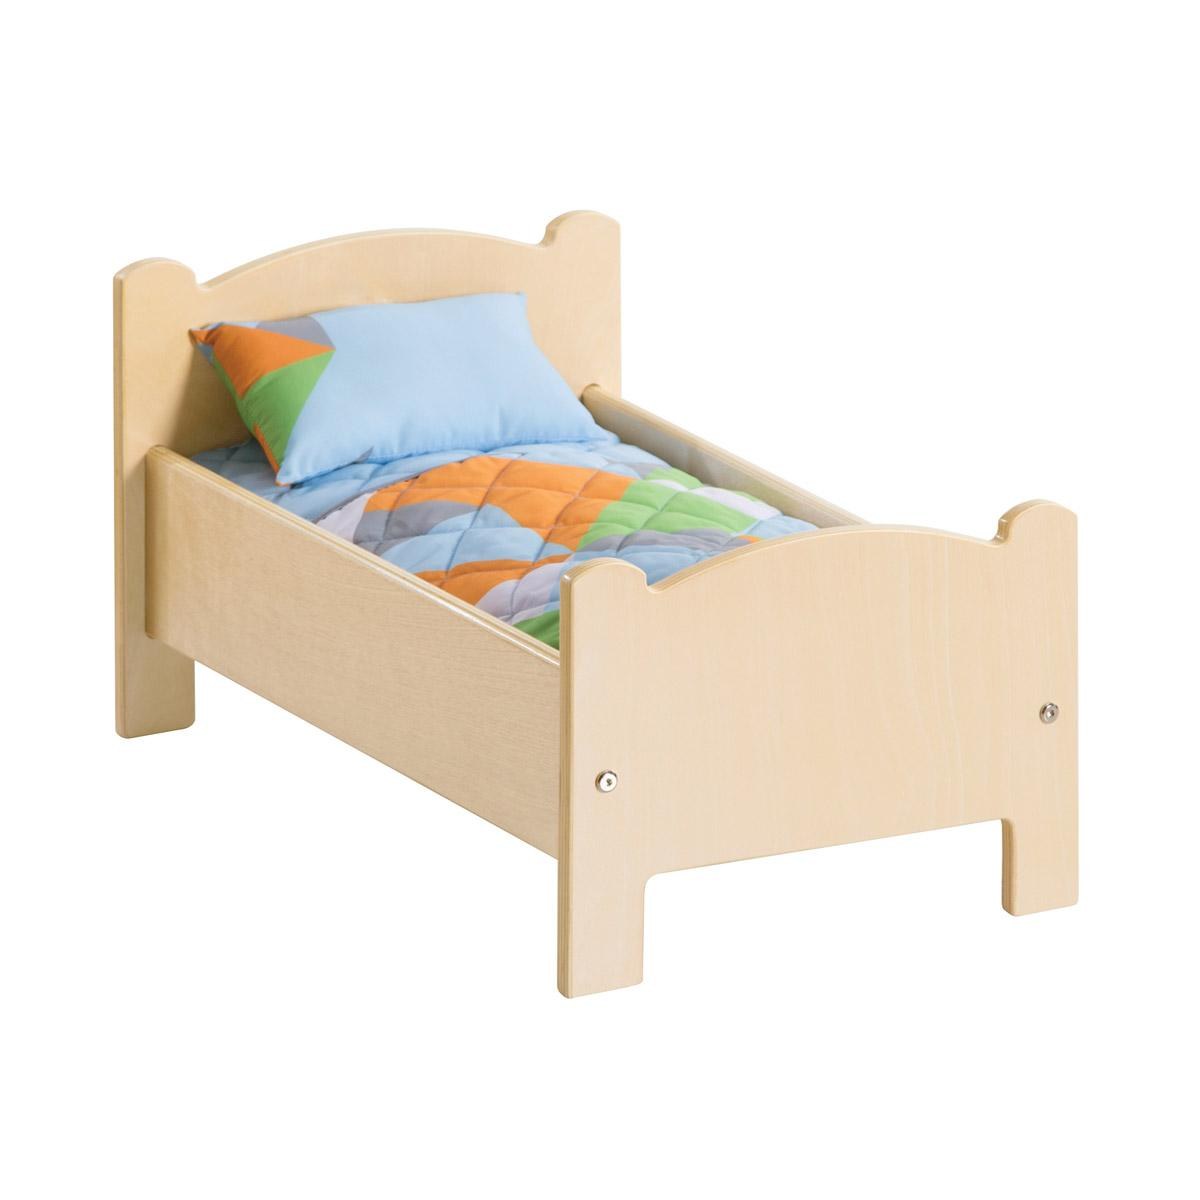 Kaplan Early Learning Company Wooden Doll Bed with Bedding